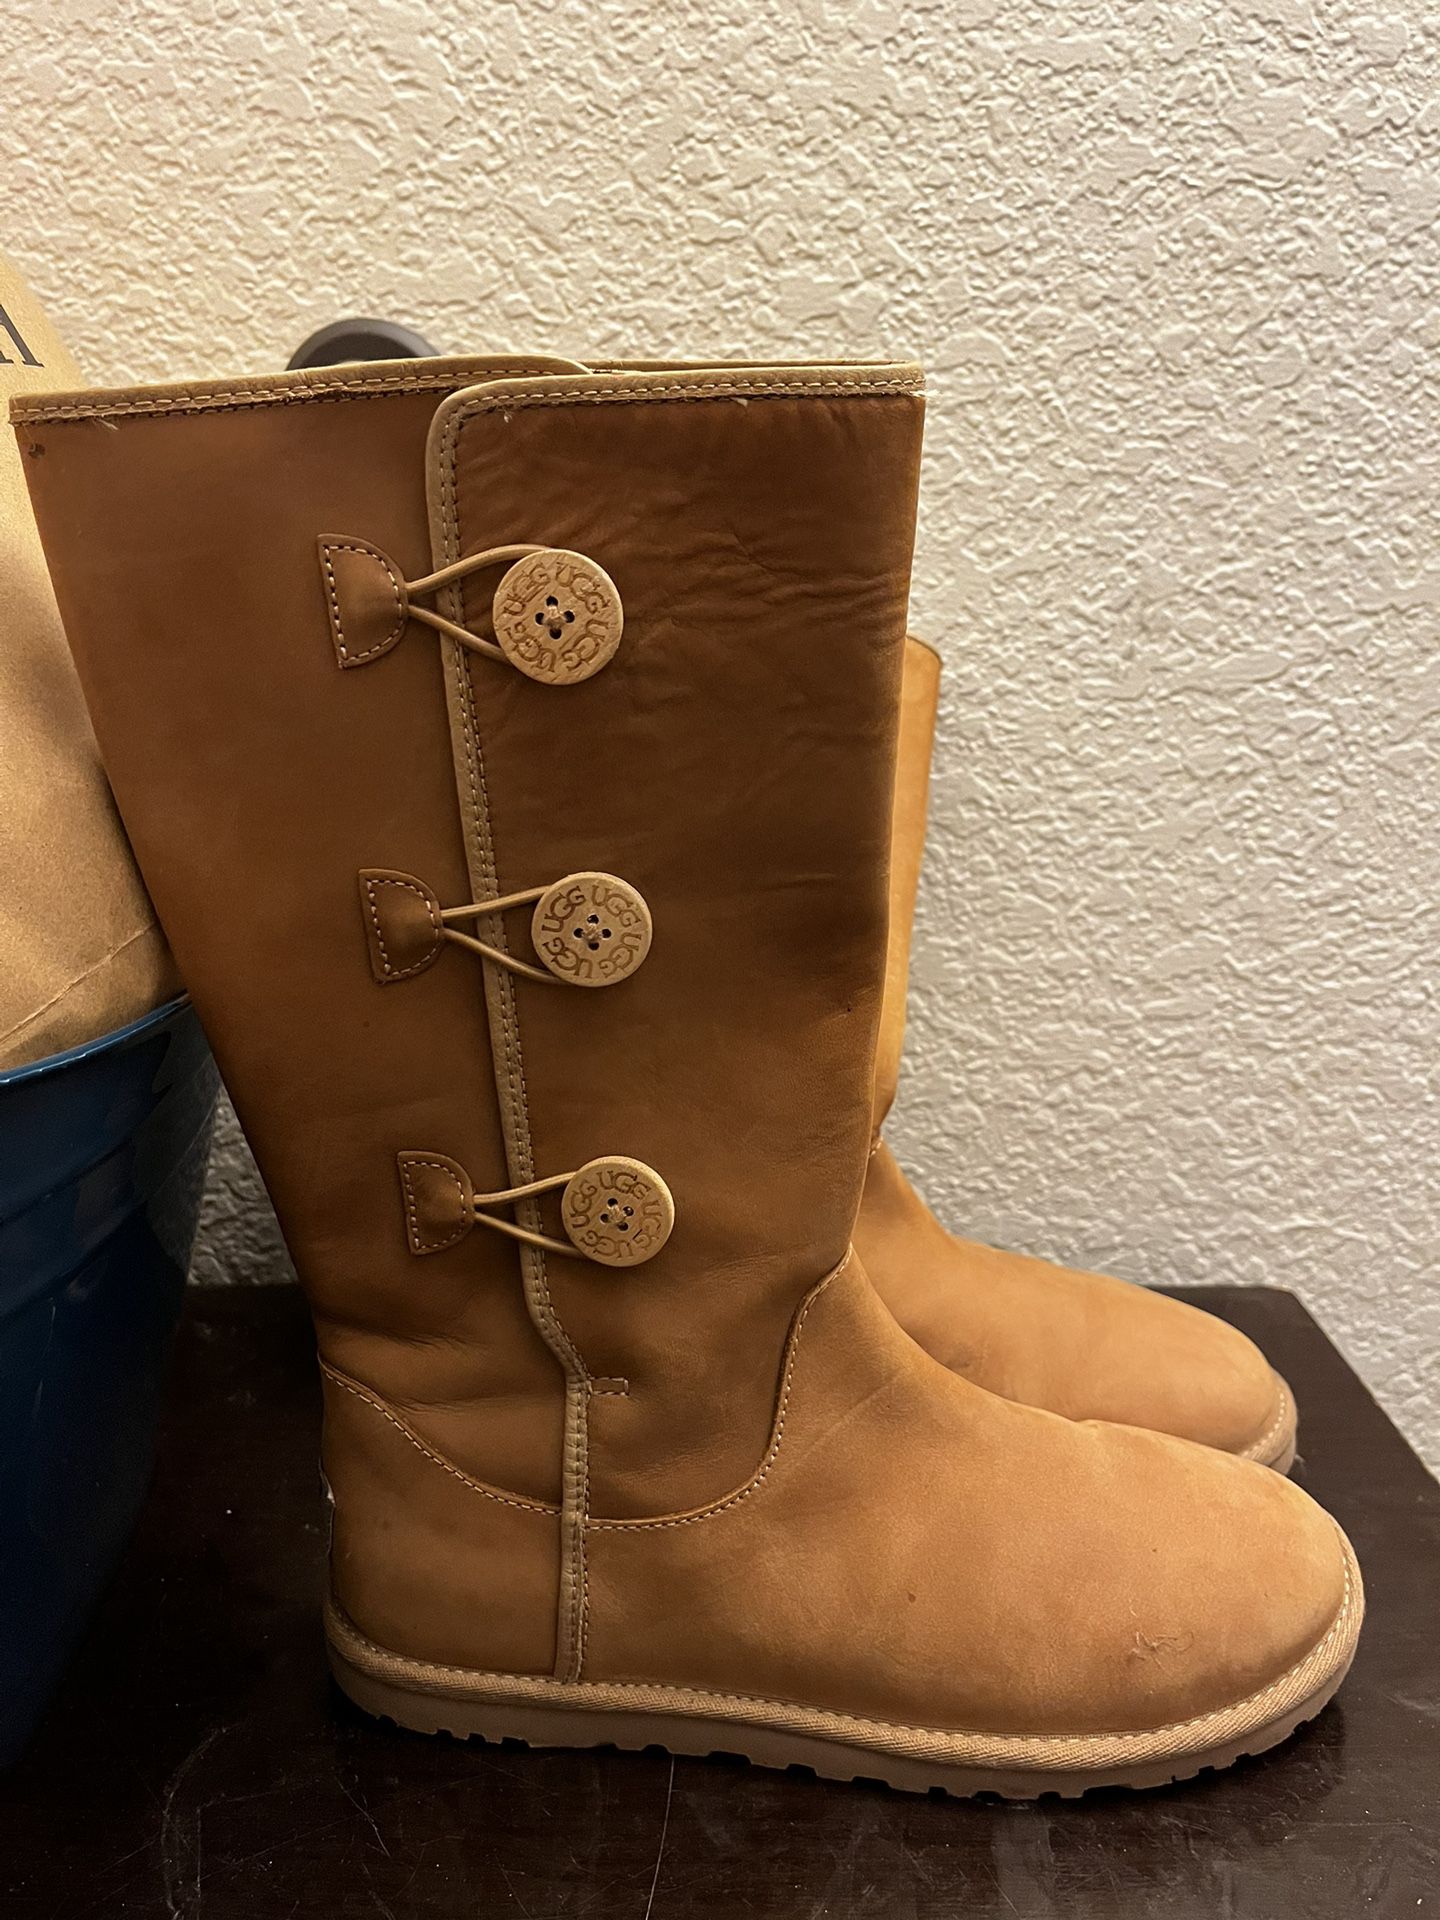 UGG Boots for Sale in Los Angeles, CA - OfferUp